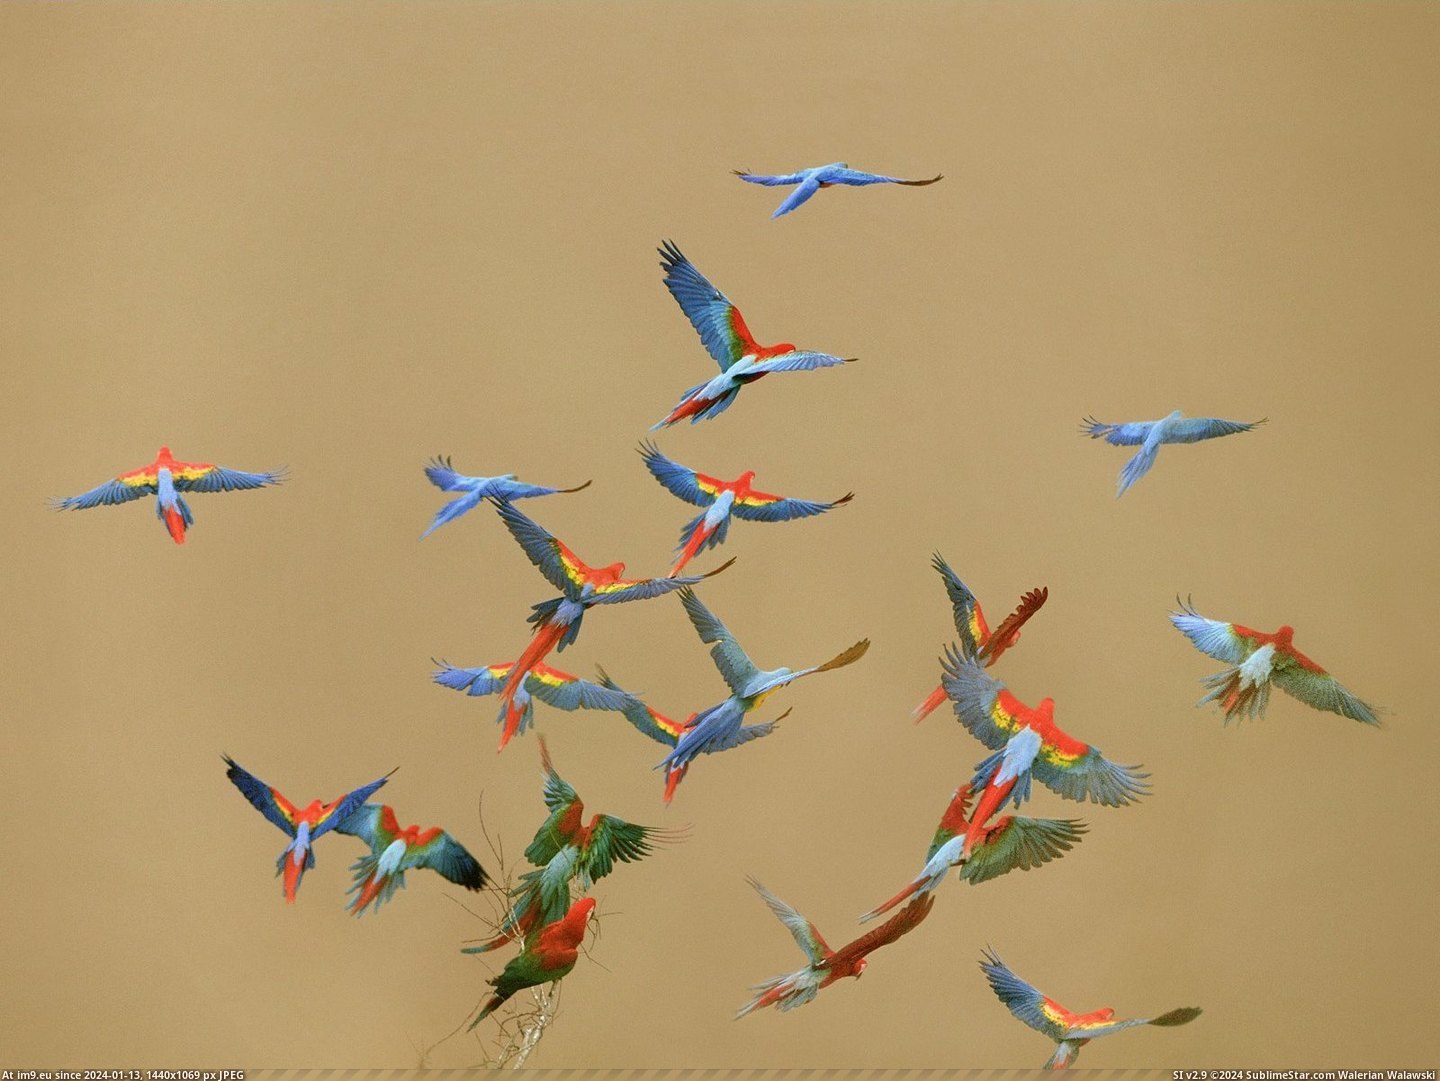 Macaws Flying Over a River, Tambopata National Reserve, Peru (in Beautiful photos and wallpapers)